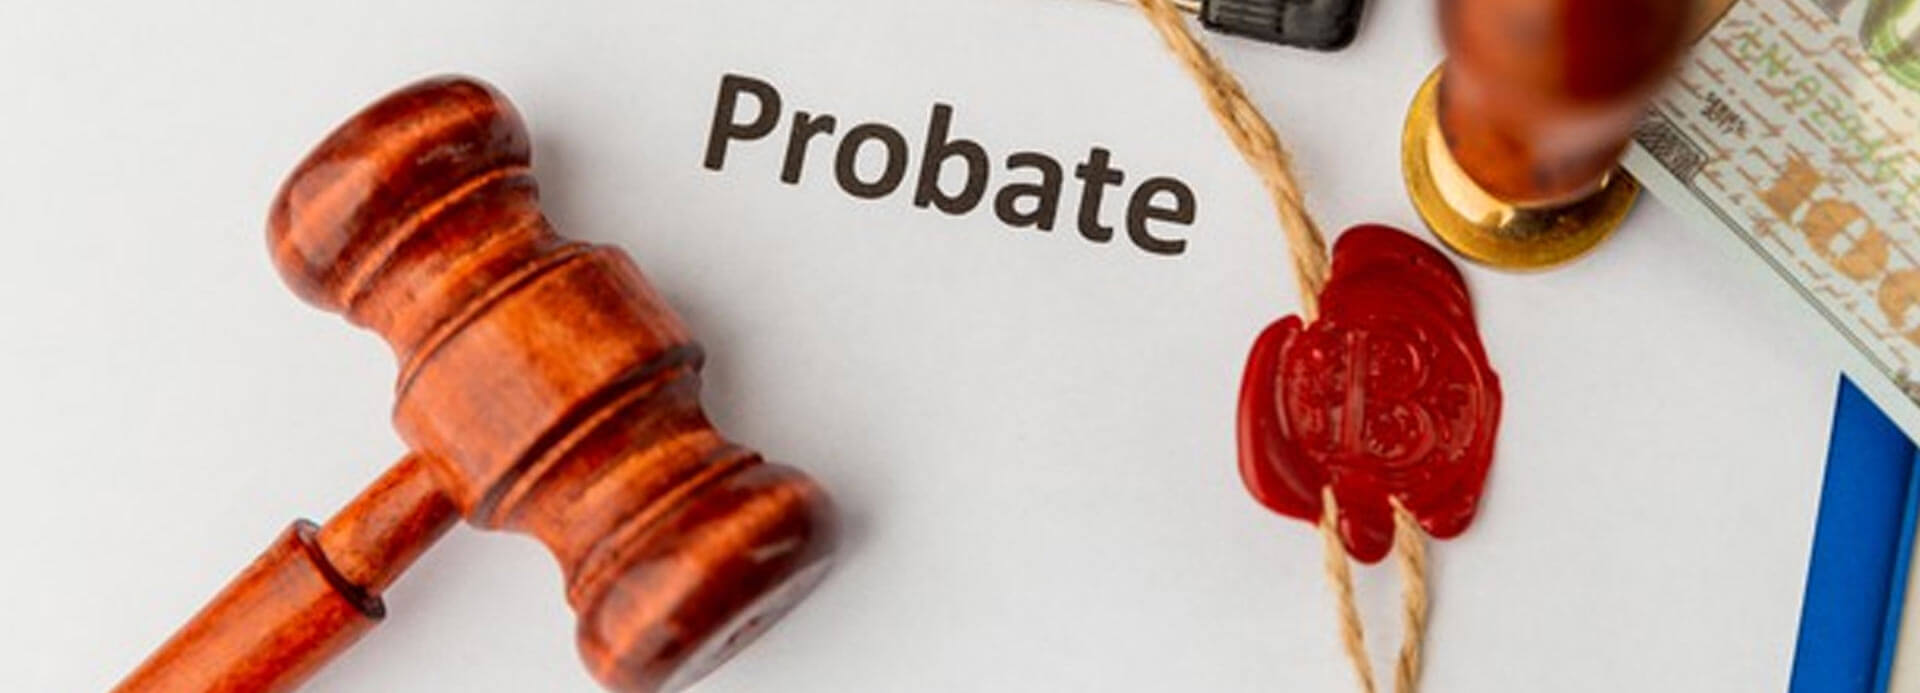 probate The Law office of John Vernon Moore